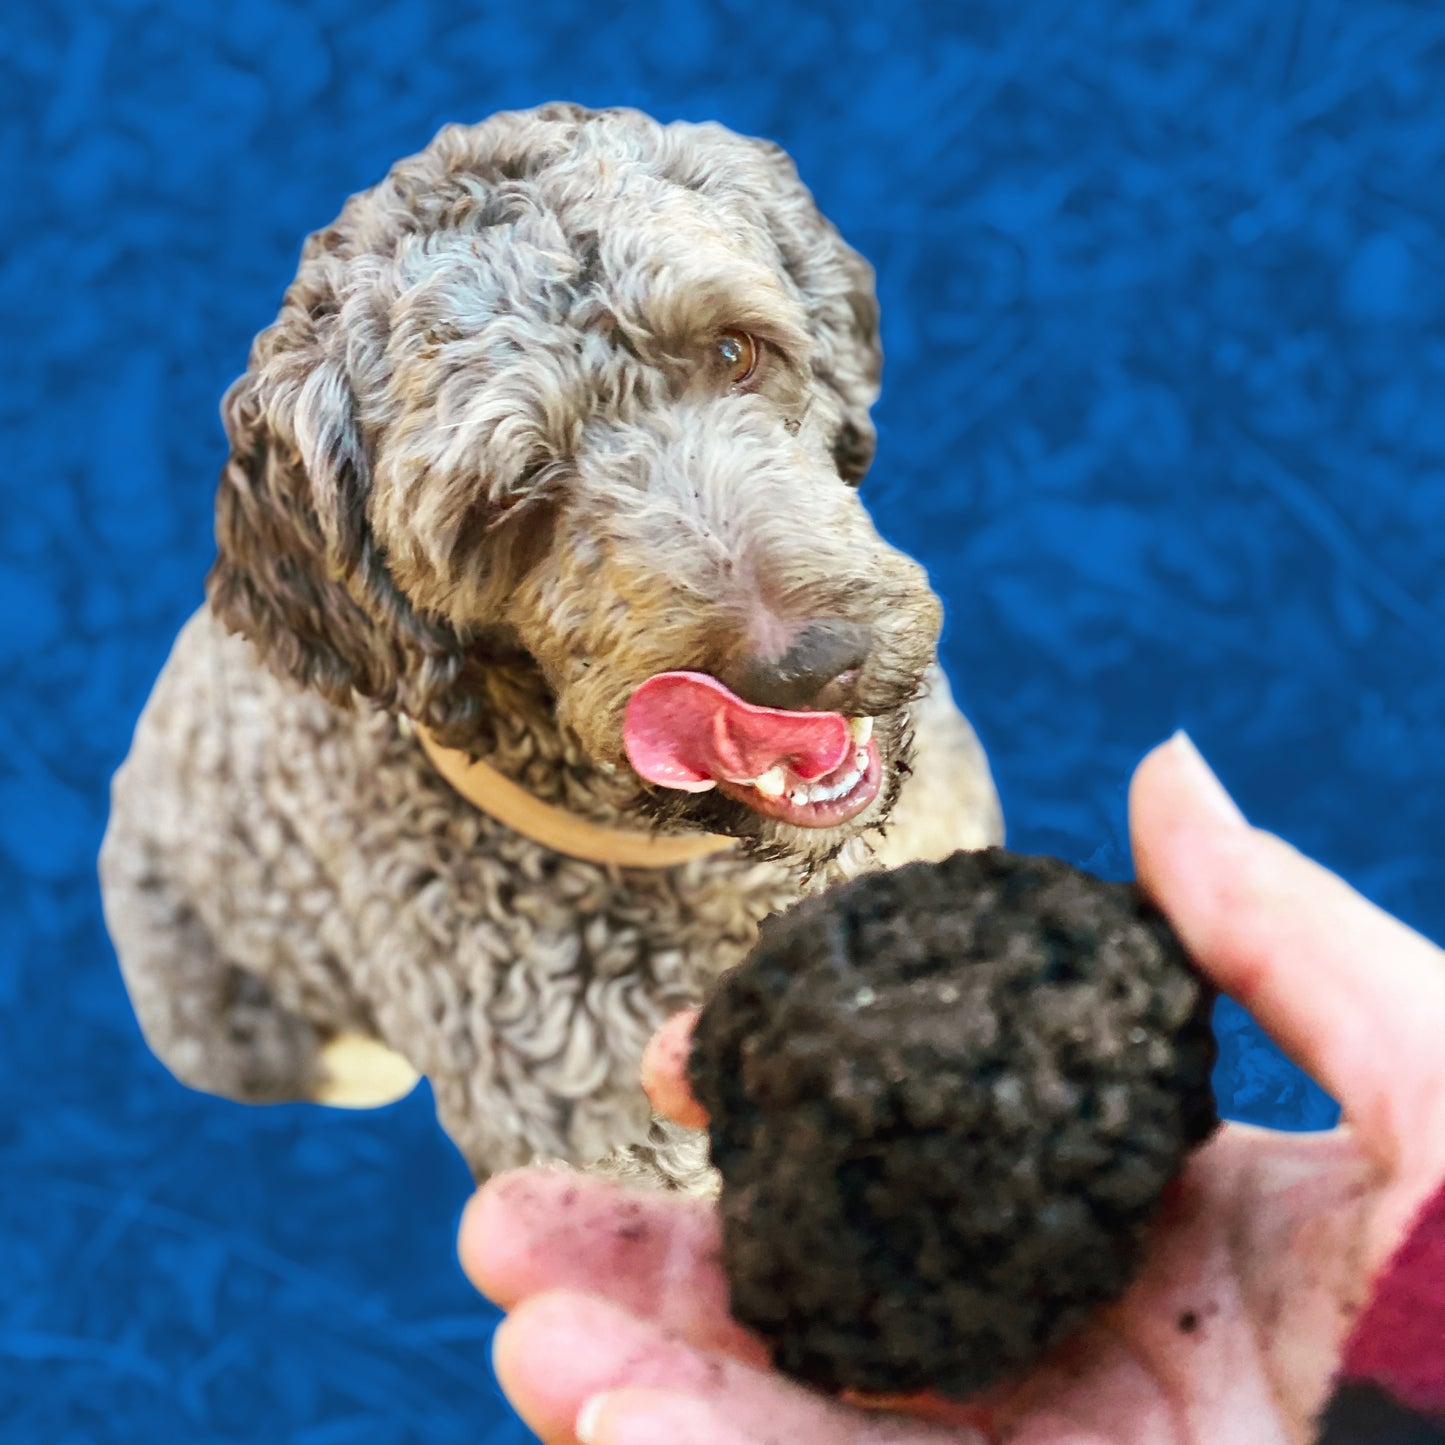 4_claim of cavage including your training and dressage of your dog looking for truffles